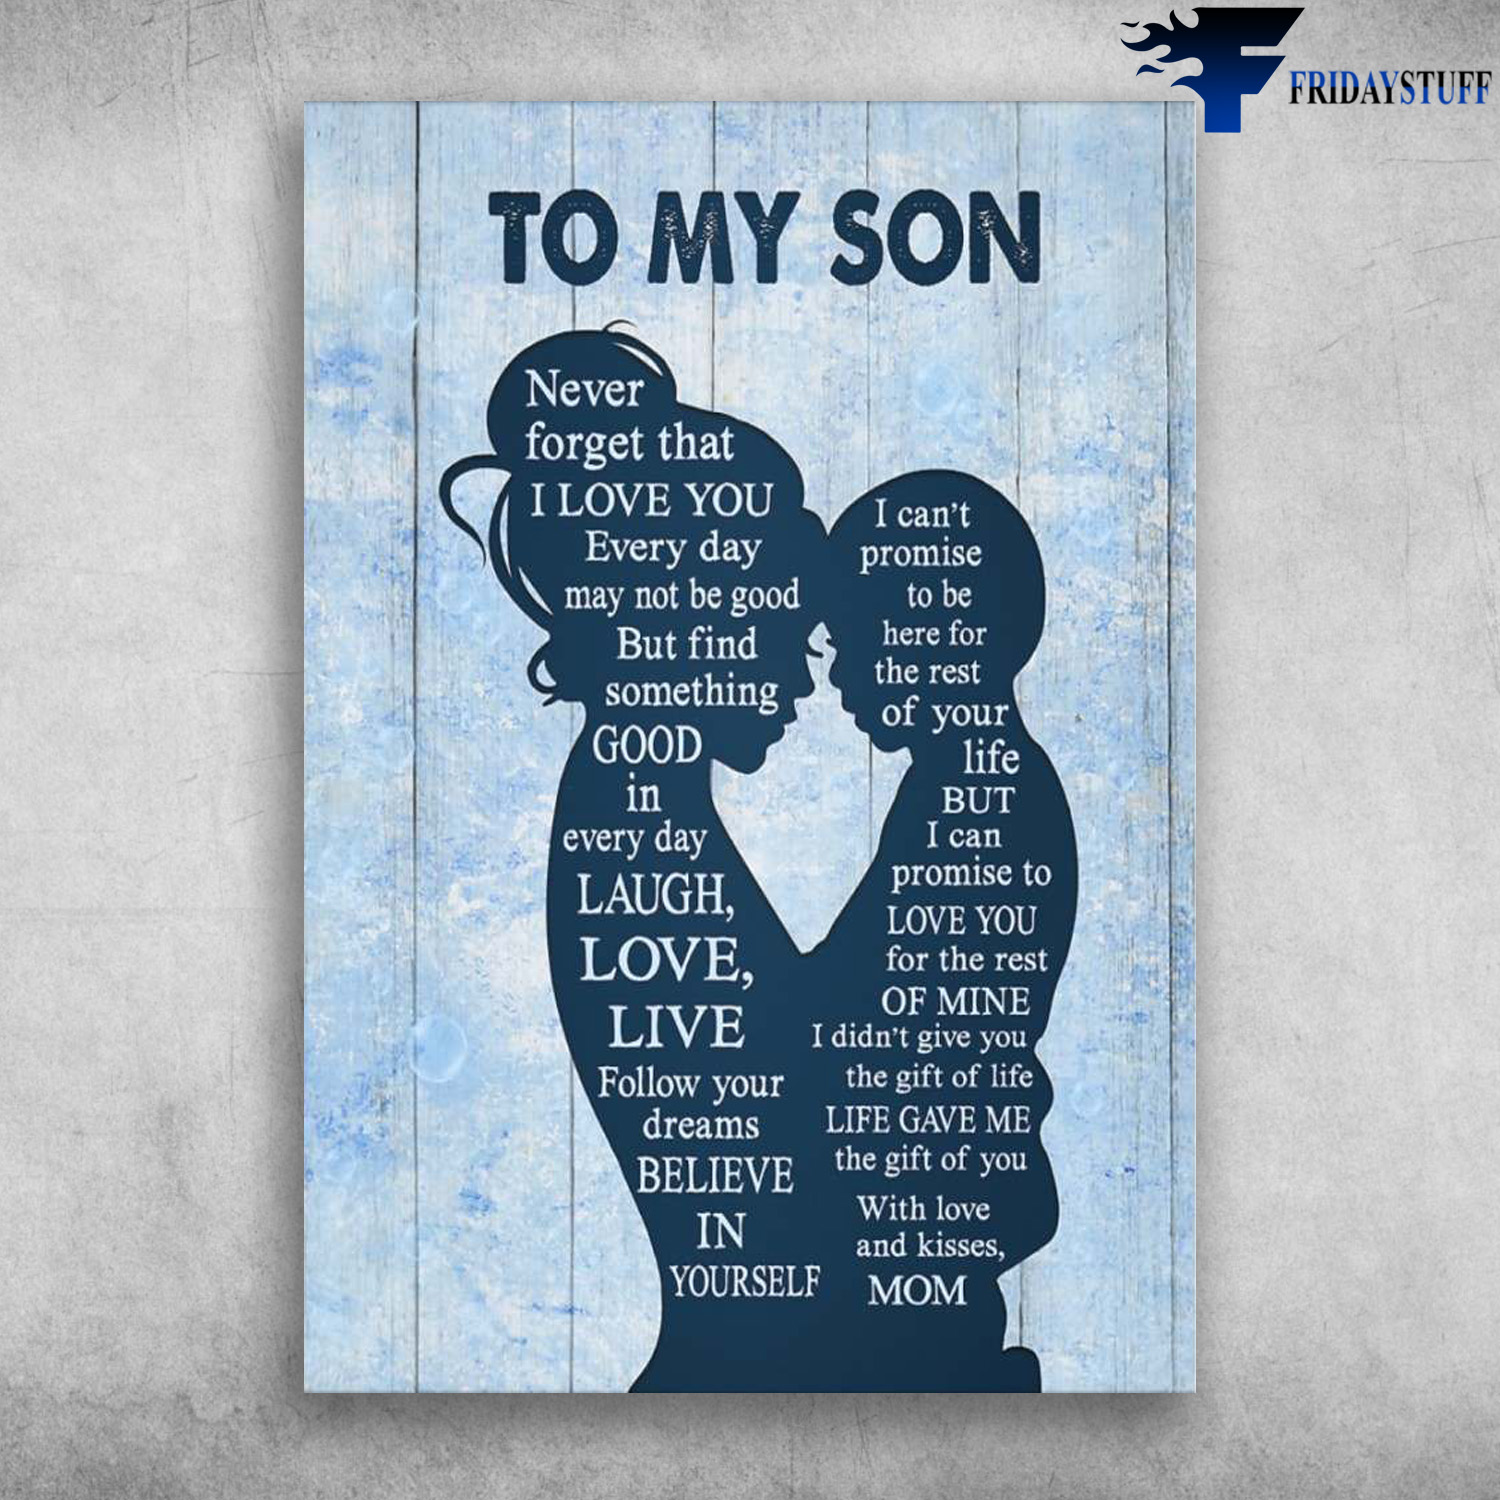 Mom And Son - To My Son, Never Forget That I Love You, Every Day May Not Be Good, But Find Something Good In Every Day, Laugh, Love, Live, Follow Your Dreams